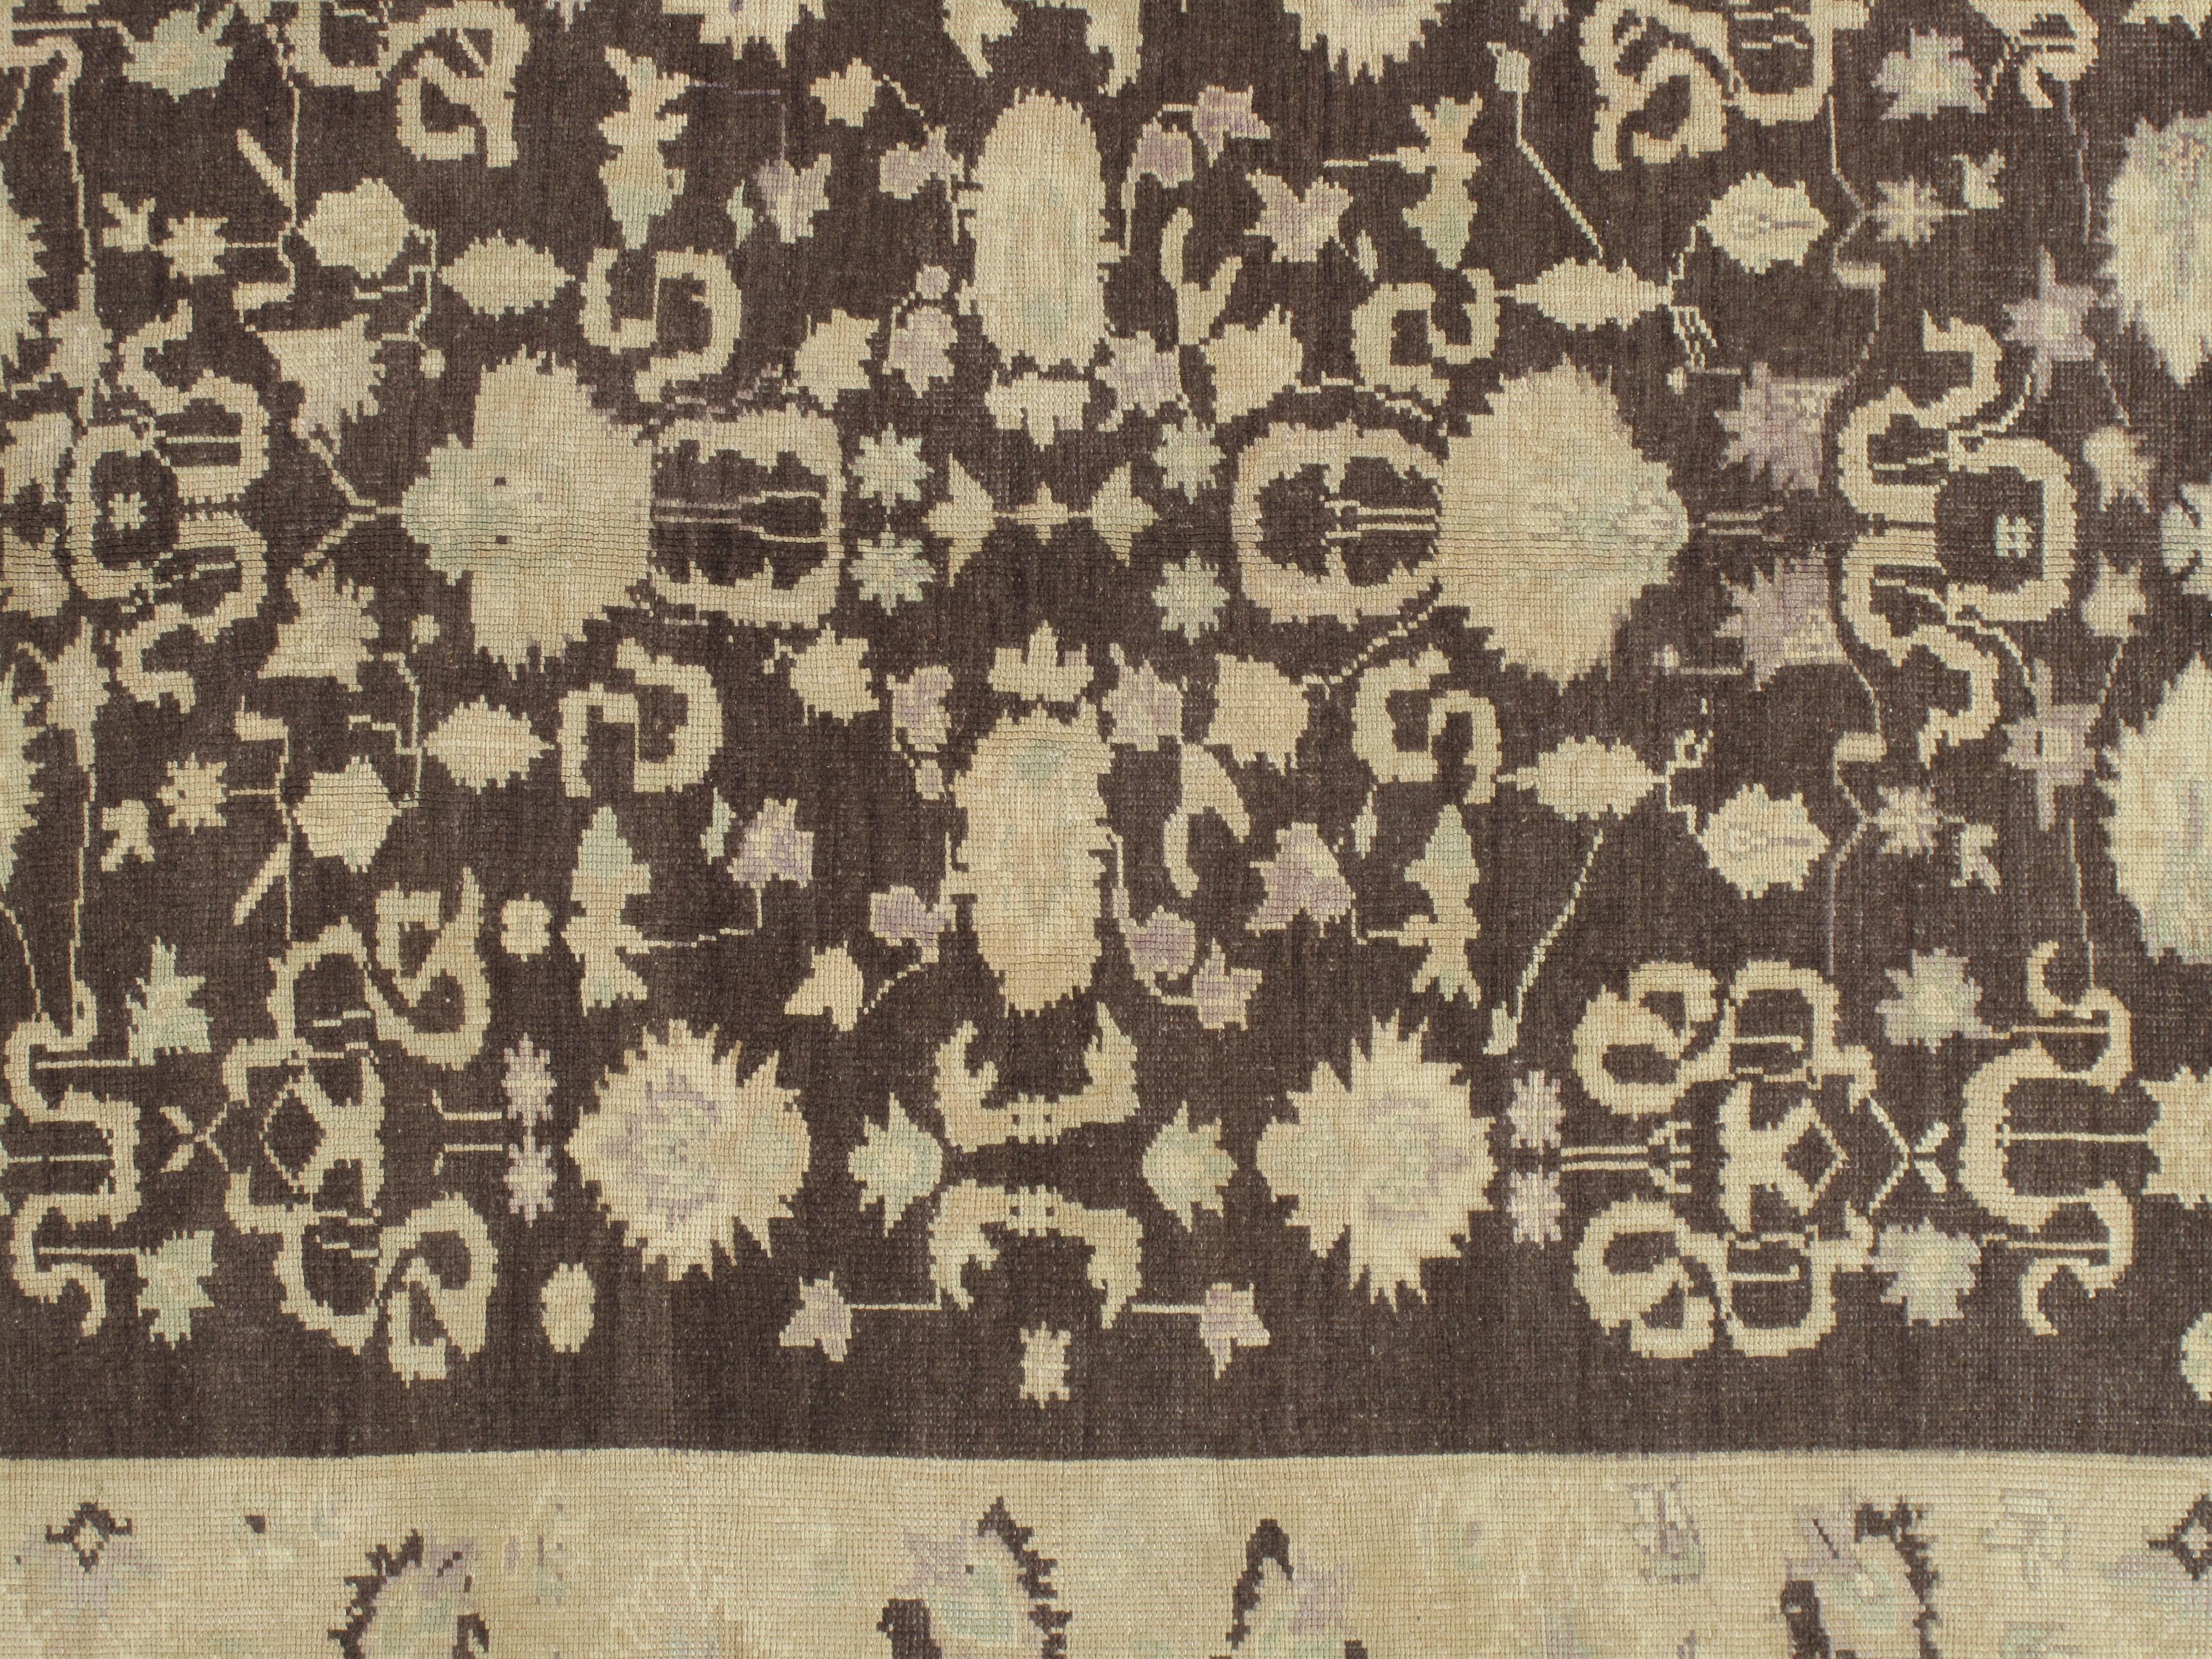 West Anatolia is one of the largest weaving regions in Turkey. Since the 15th century, Turkish rugs have always been on top of the list for having fine oriental rugs.
Oushak rugs such as this, are desirable in today’s highly decorative market. A